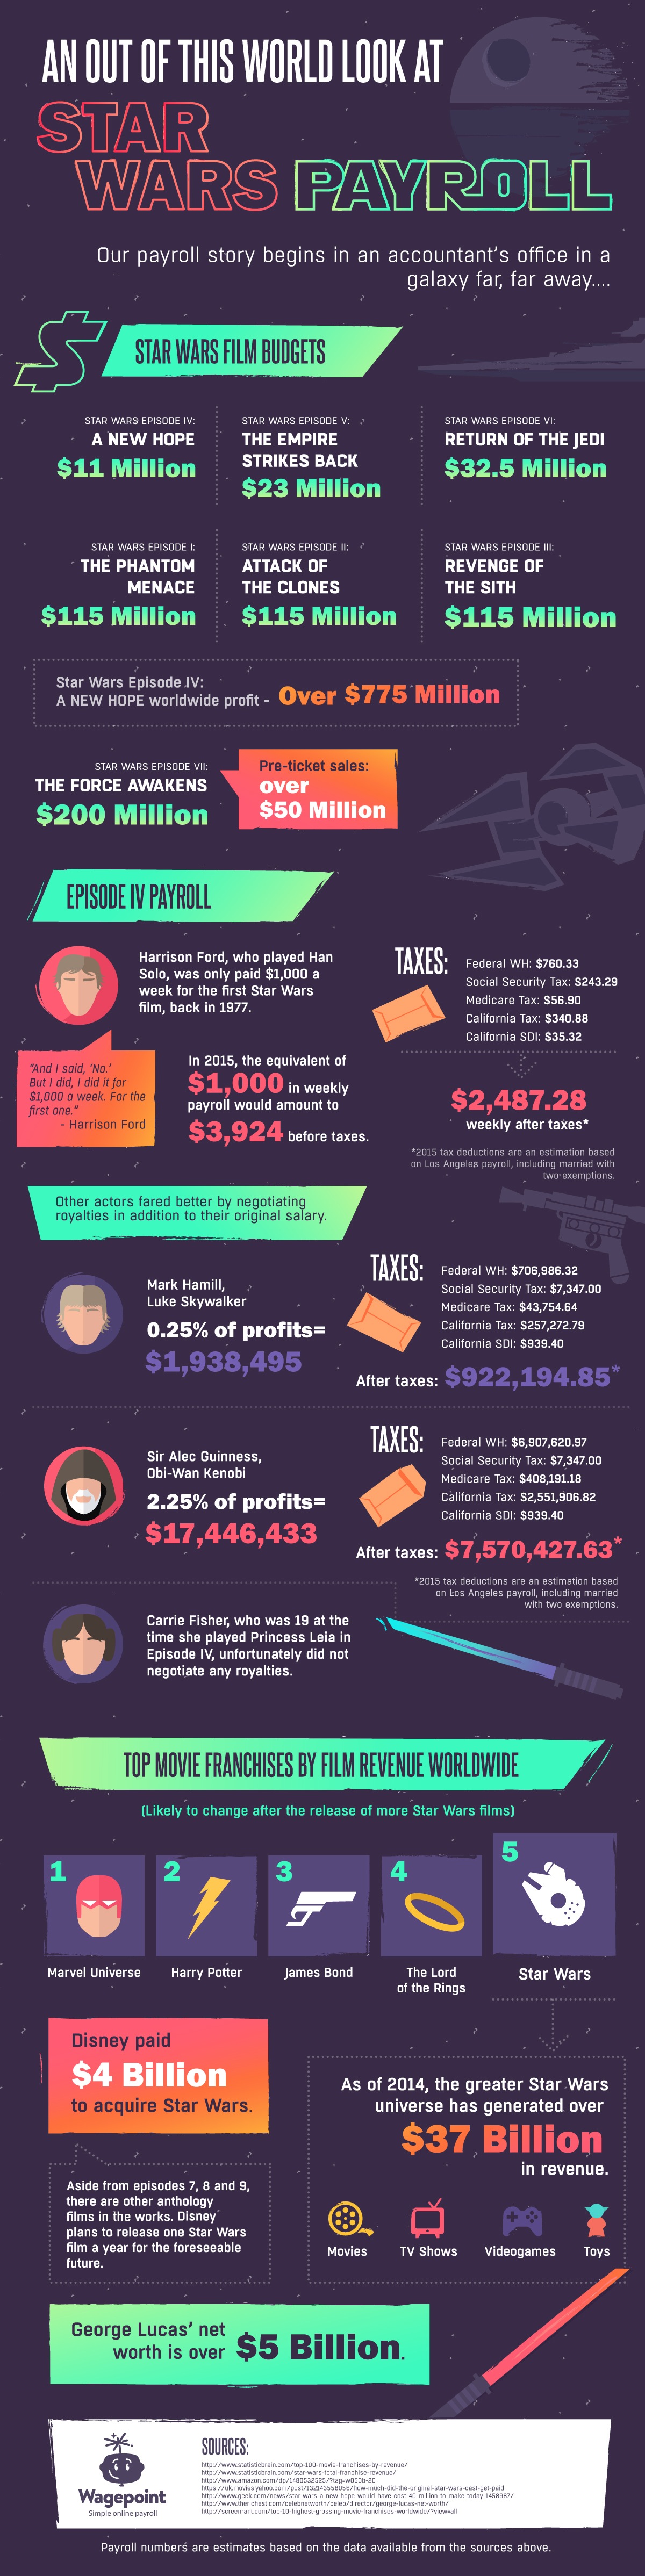 Infographic Star Wars Payroll